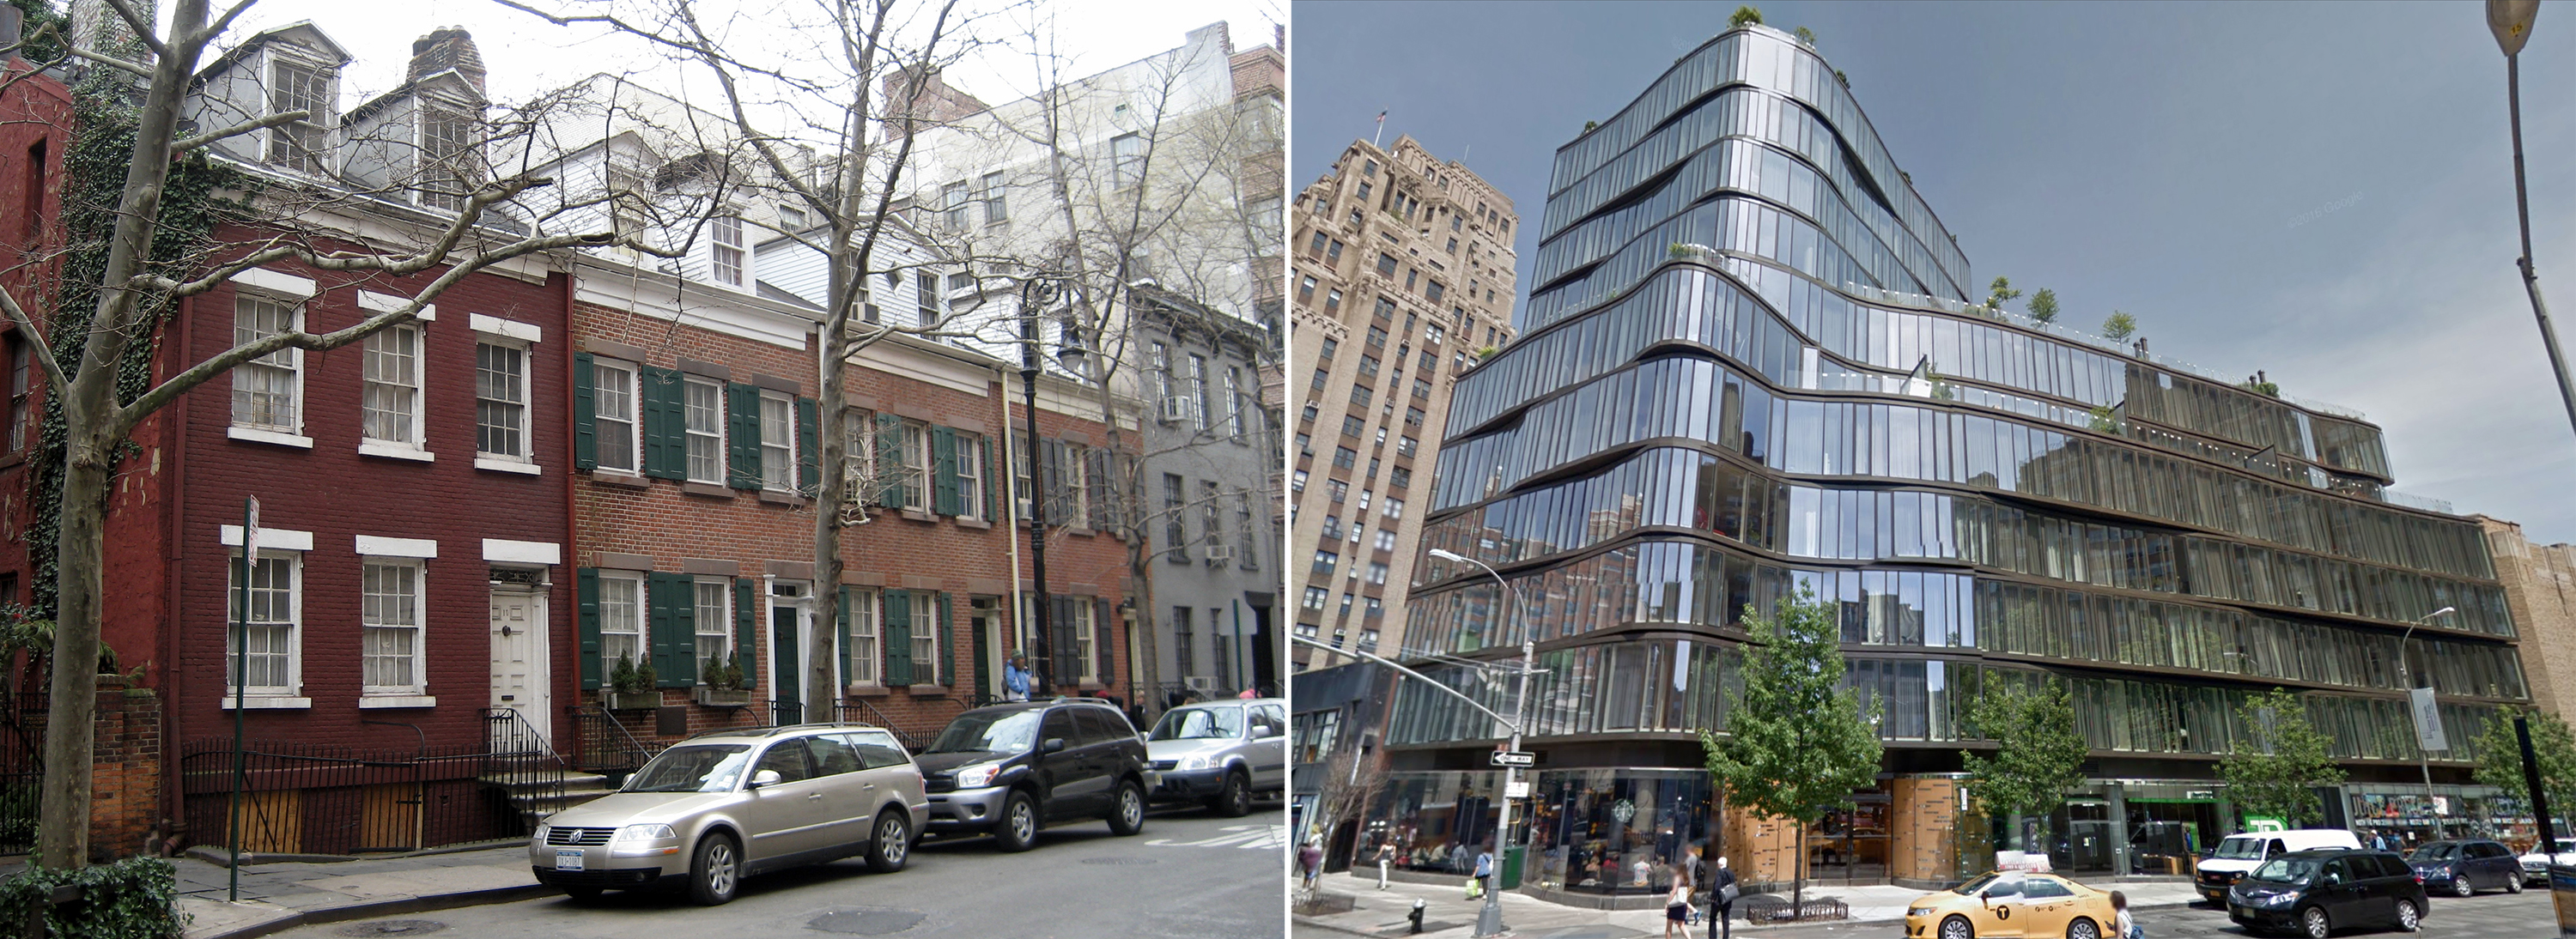 Buildings on Grove Street constructed prior to the designation of the Greenwich Village Historic District, photo by Wally Gobetz/Flickr, and 122 Greenwich Avenue, approved in 2007, photo via Google Maps